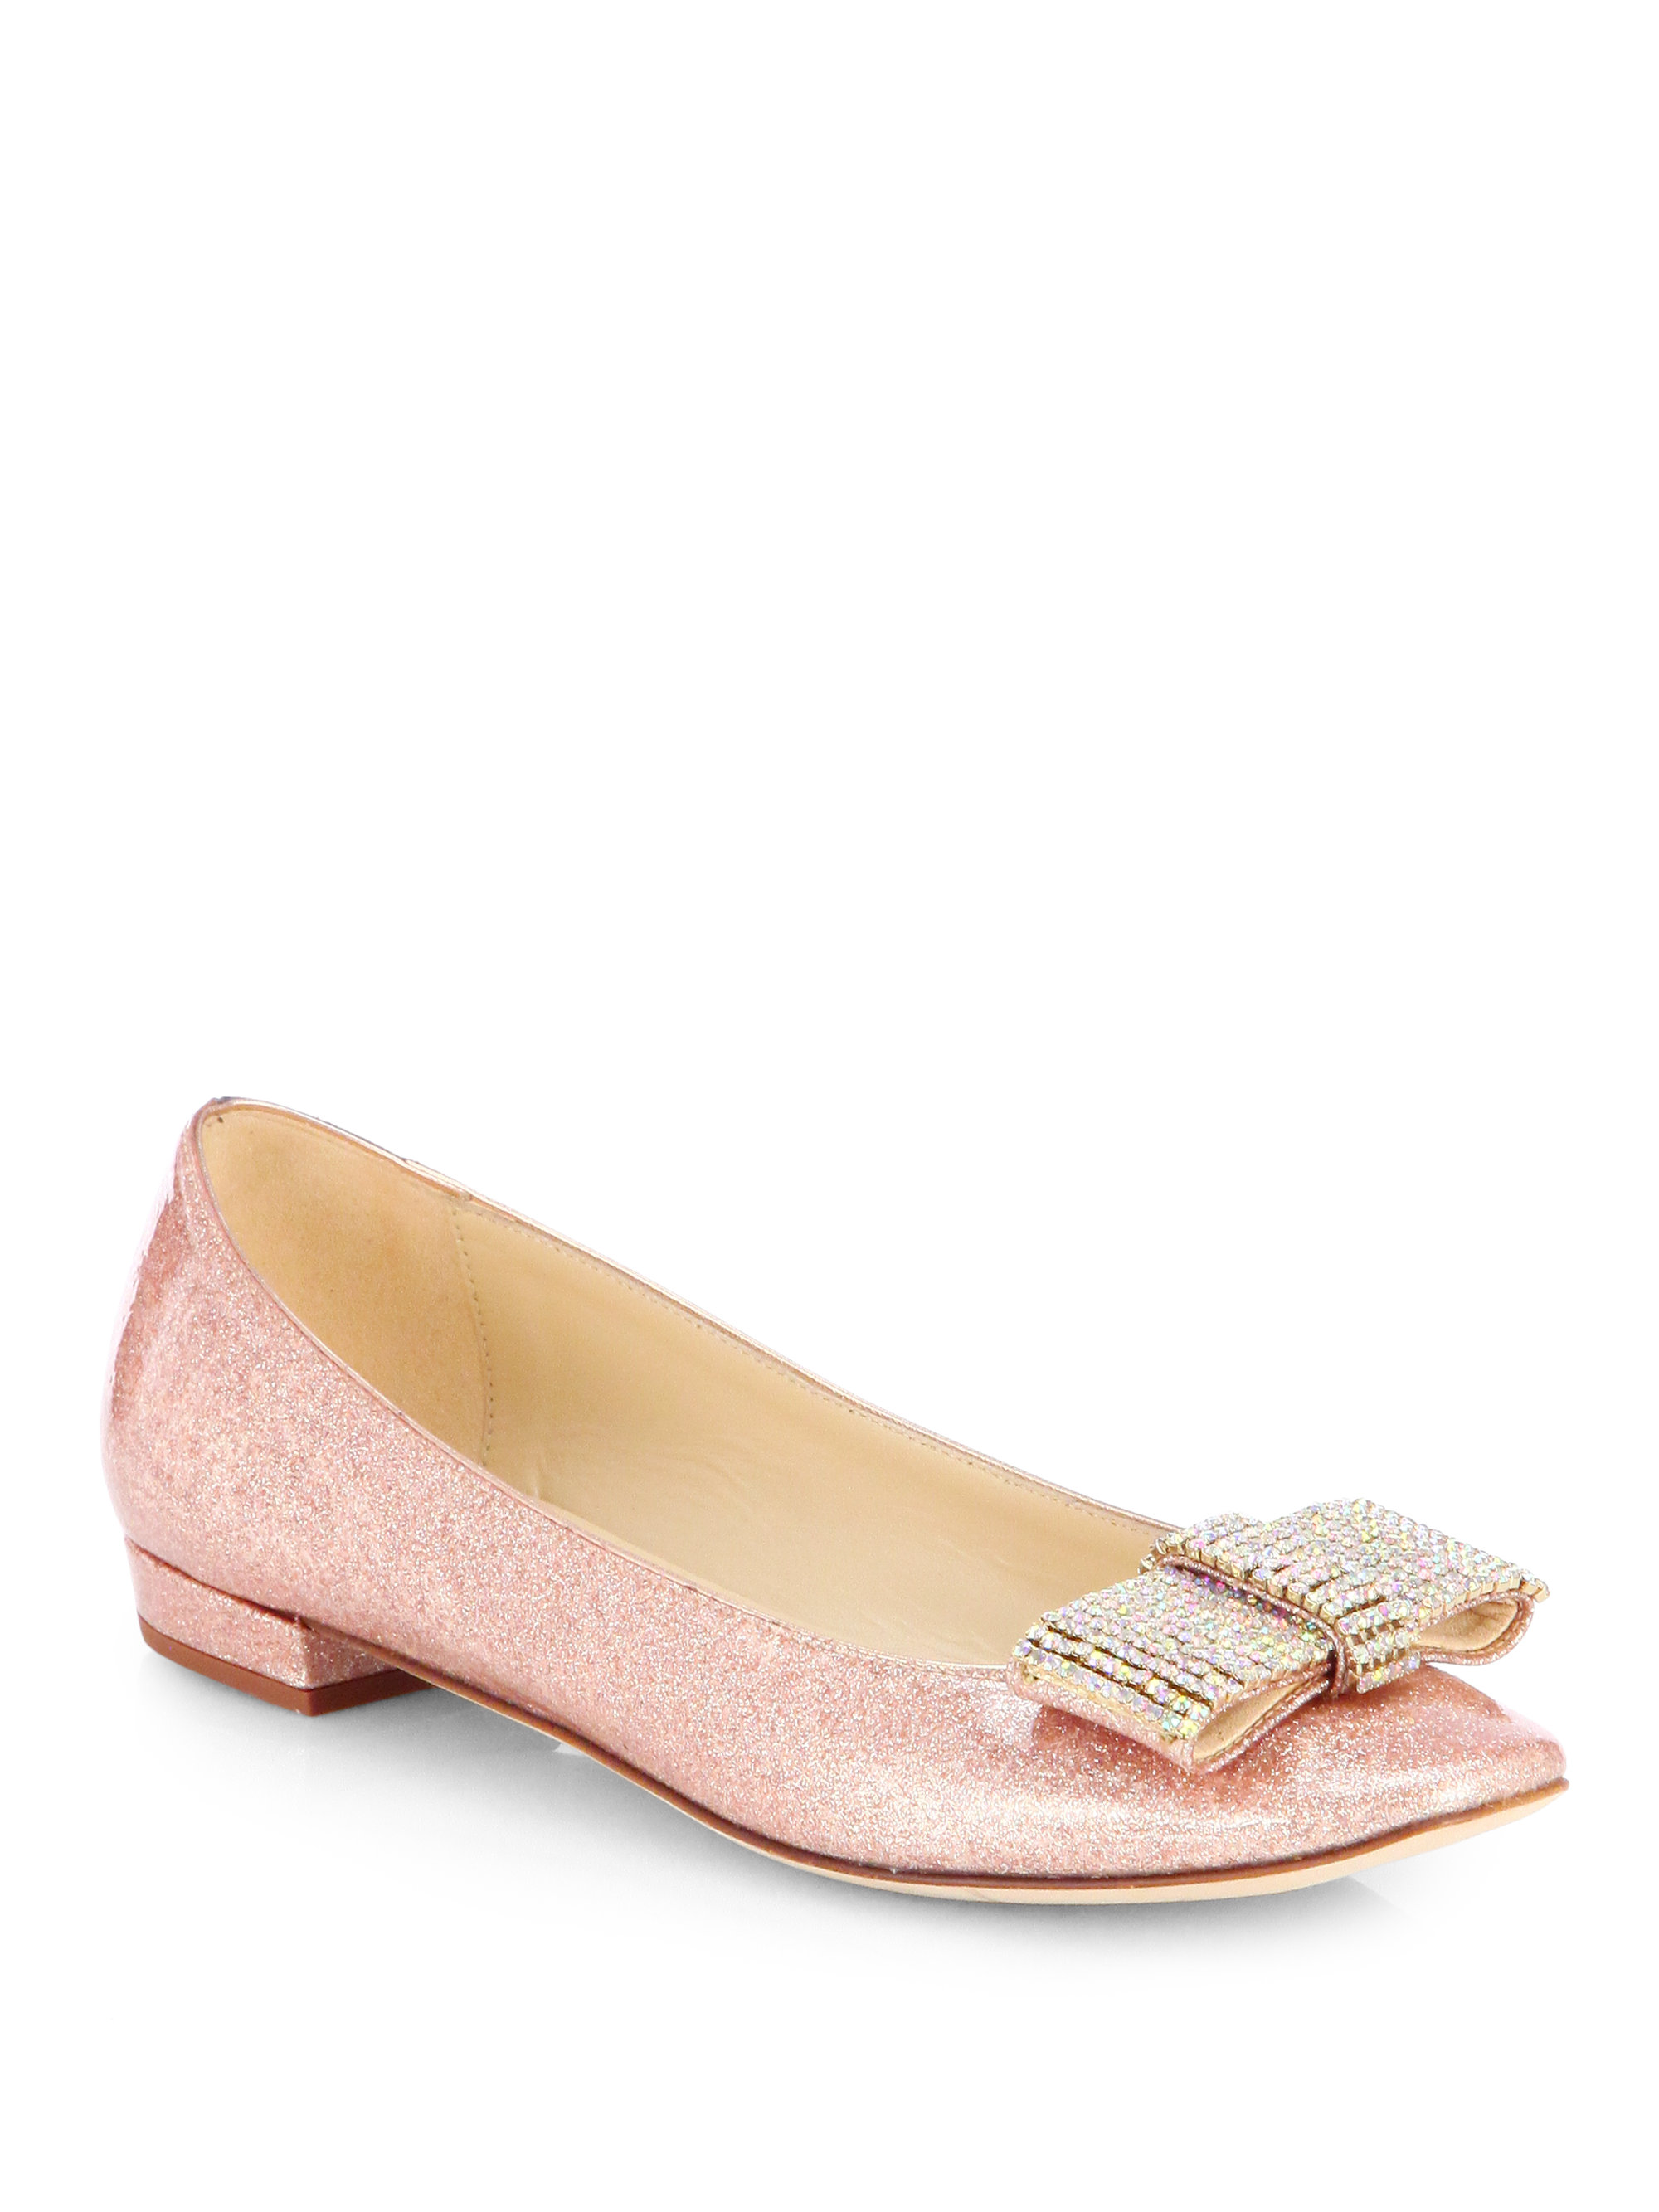 Kate Spade Niesha Glitter Bow Ballet Flats in Pink (ROSE GOLD) | Lyst